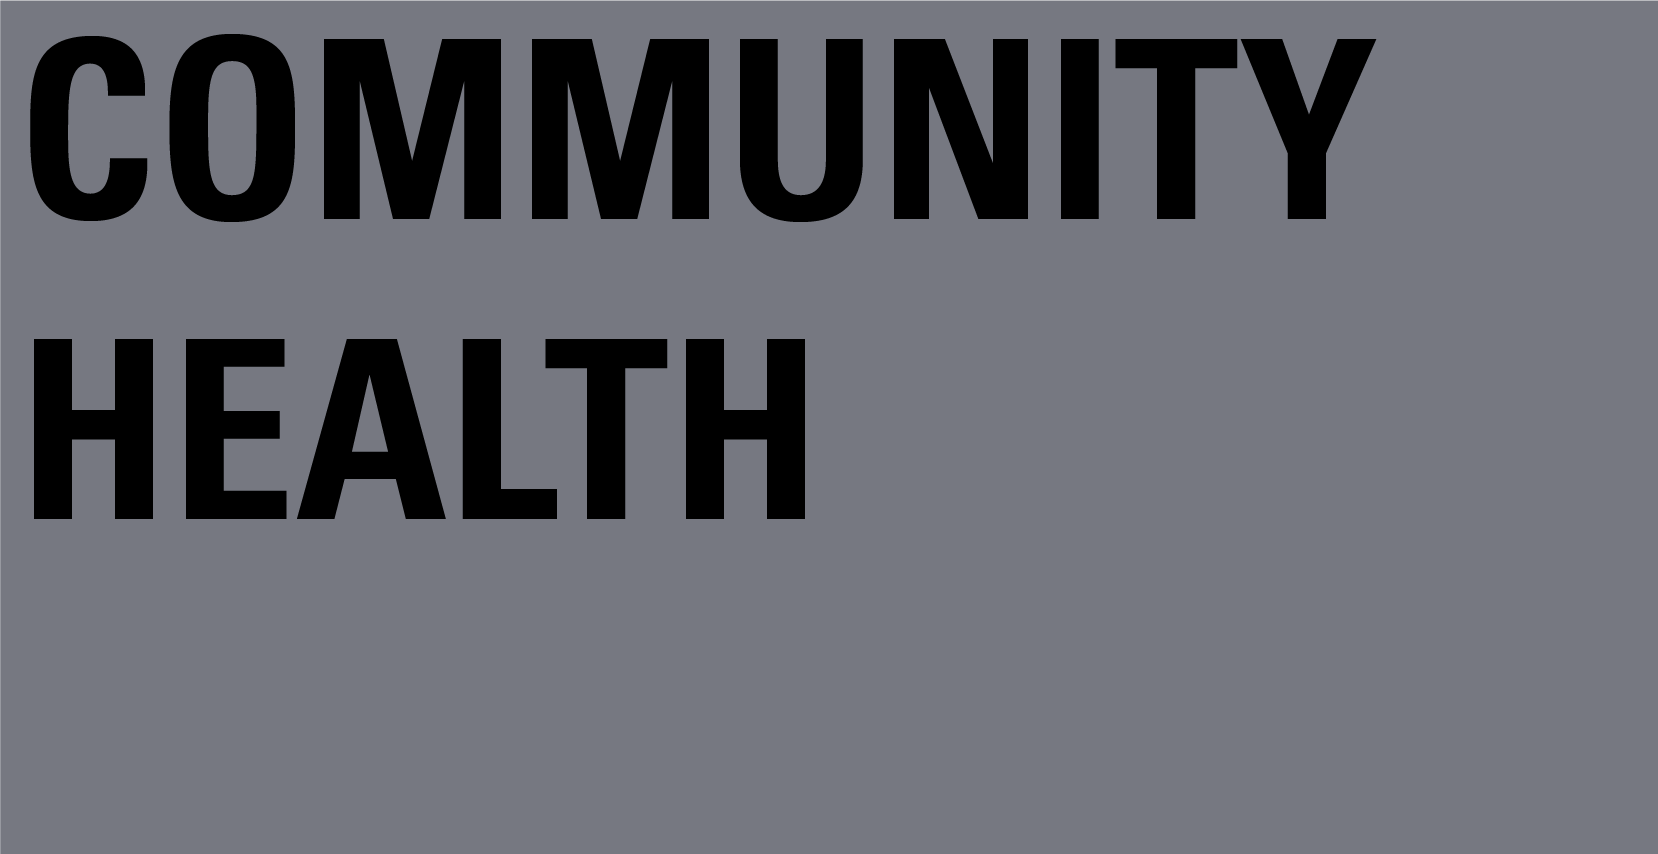 about_us_community_health